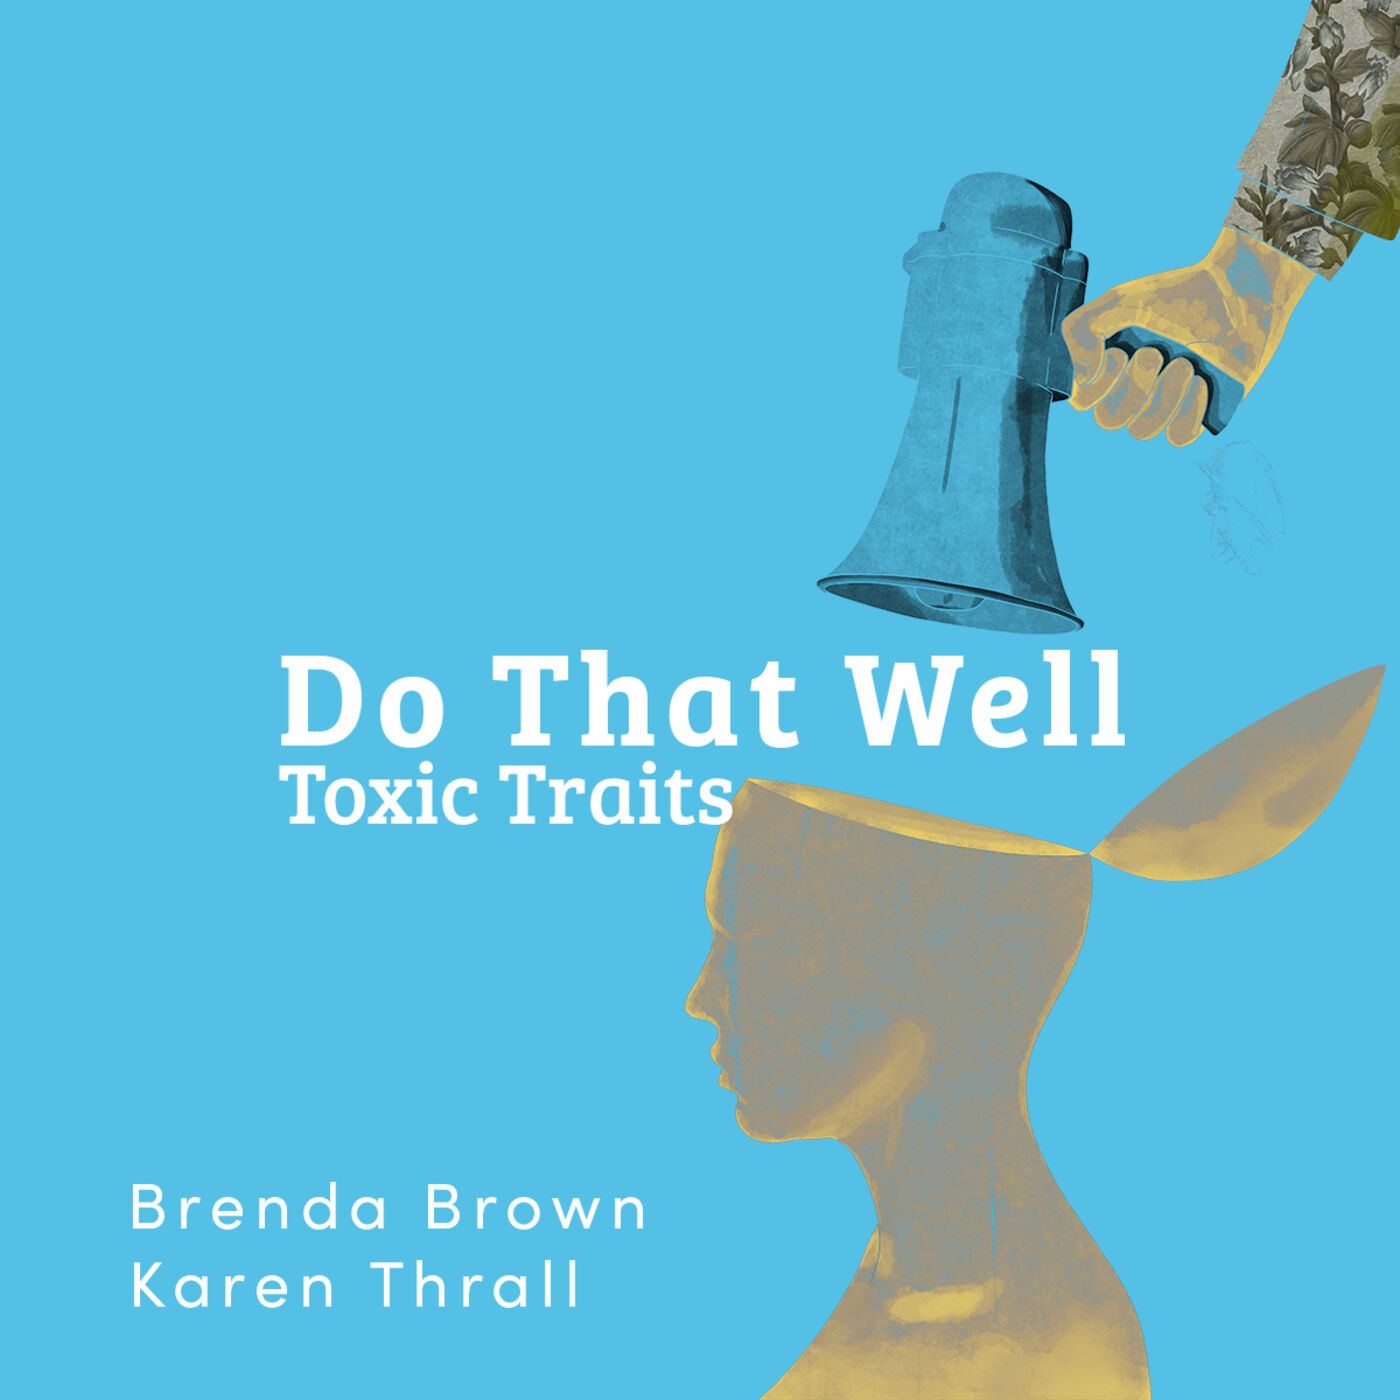 Do That Well: Toxic Traits